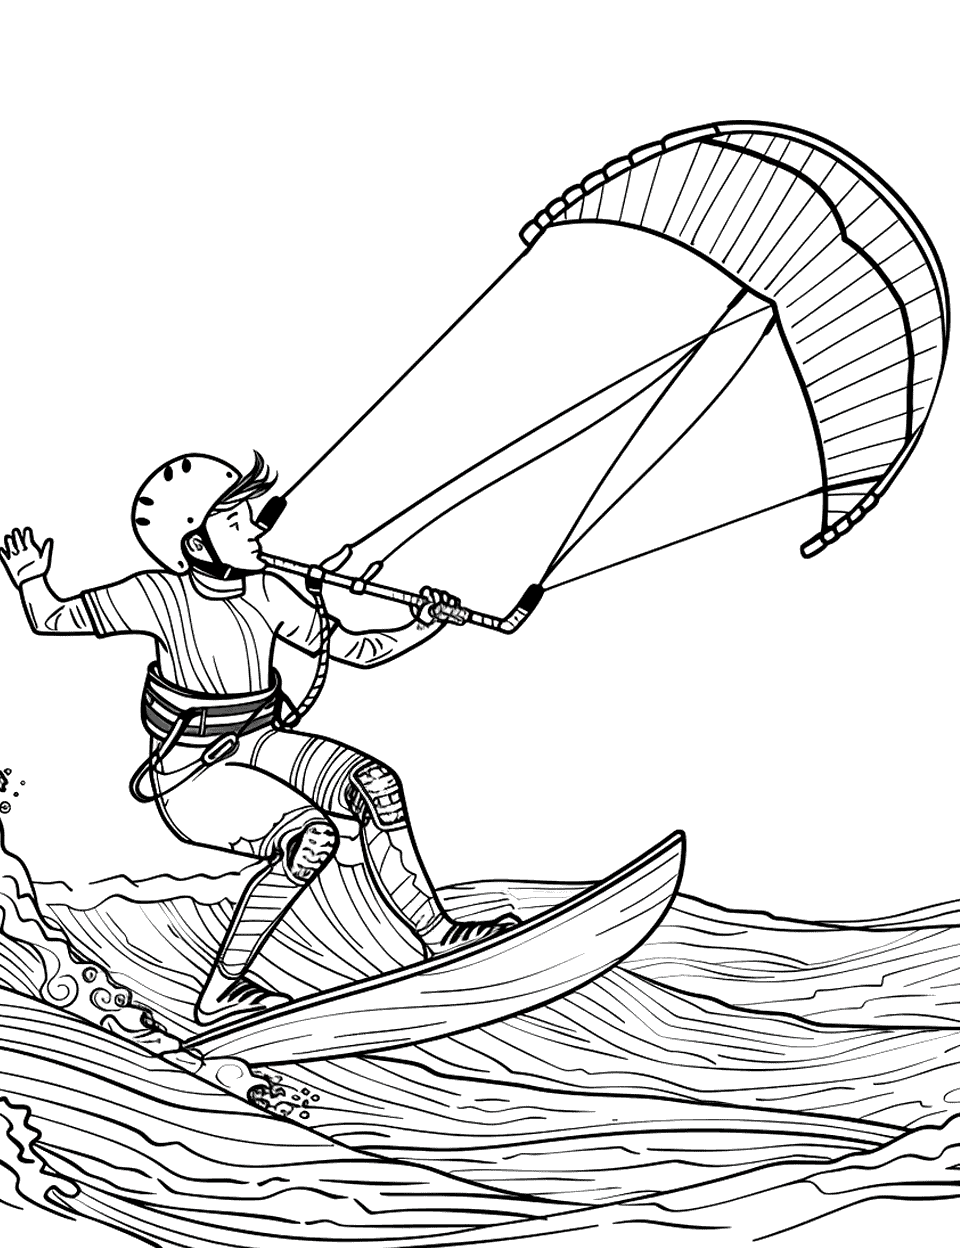 Kite Surfing on the Waves Sports Coloring Page - A kite surfer gliding on the water, pulled by a kite.